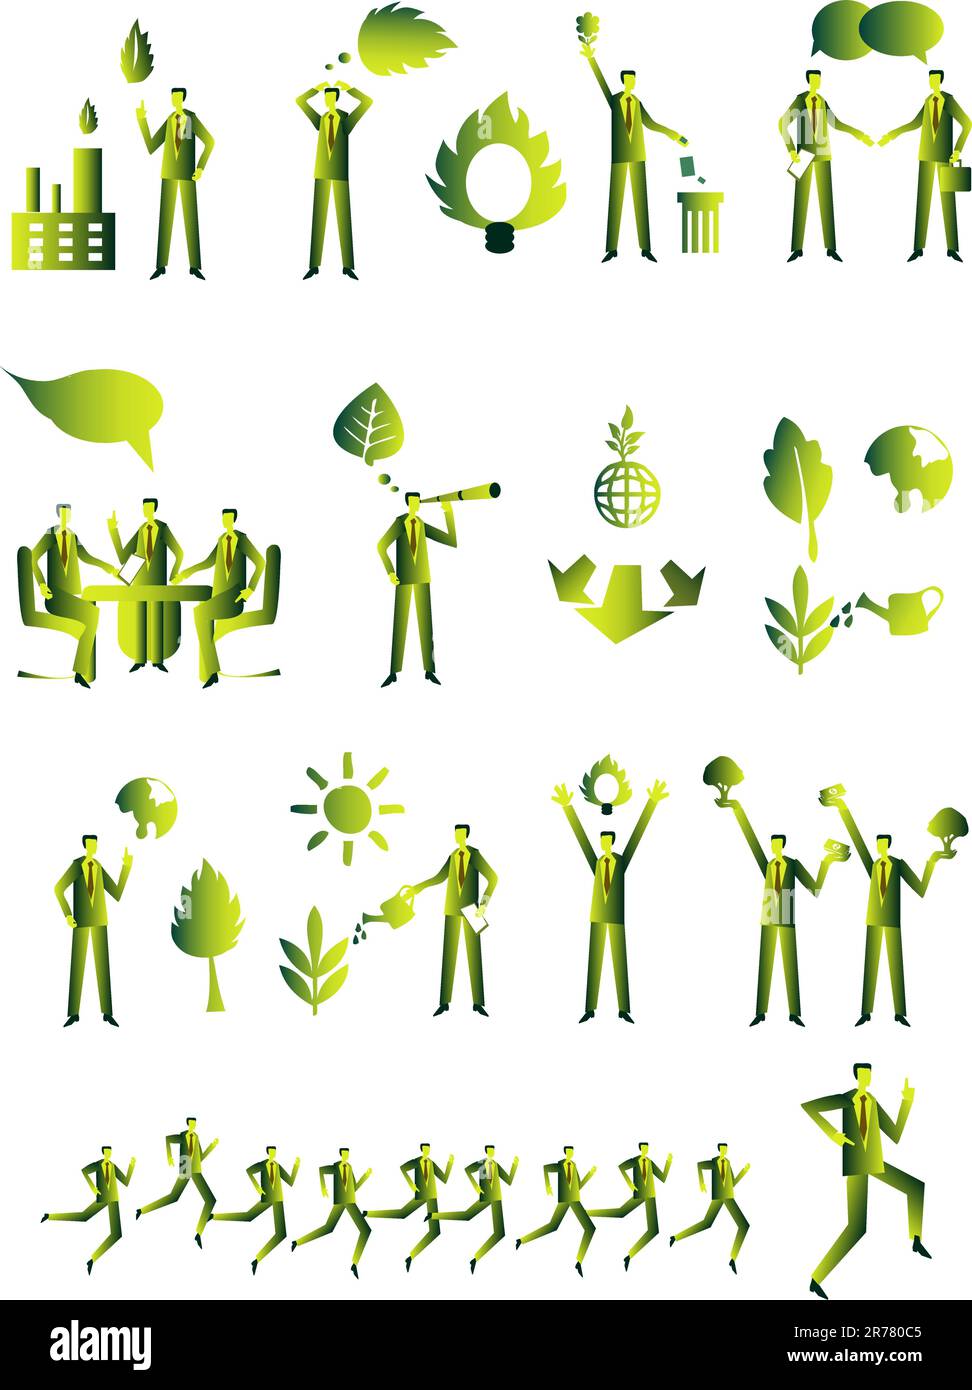 Ecology people group, business icons set Stock Vector